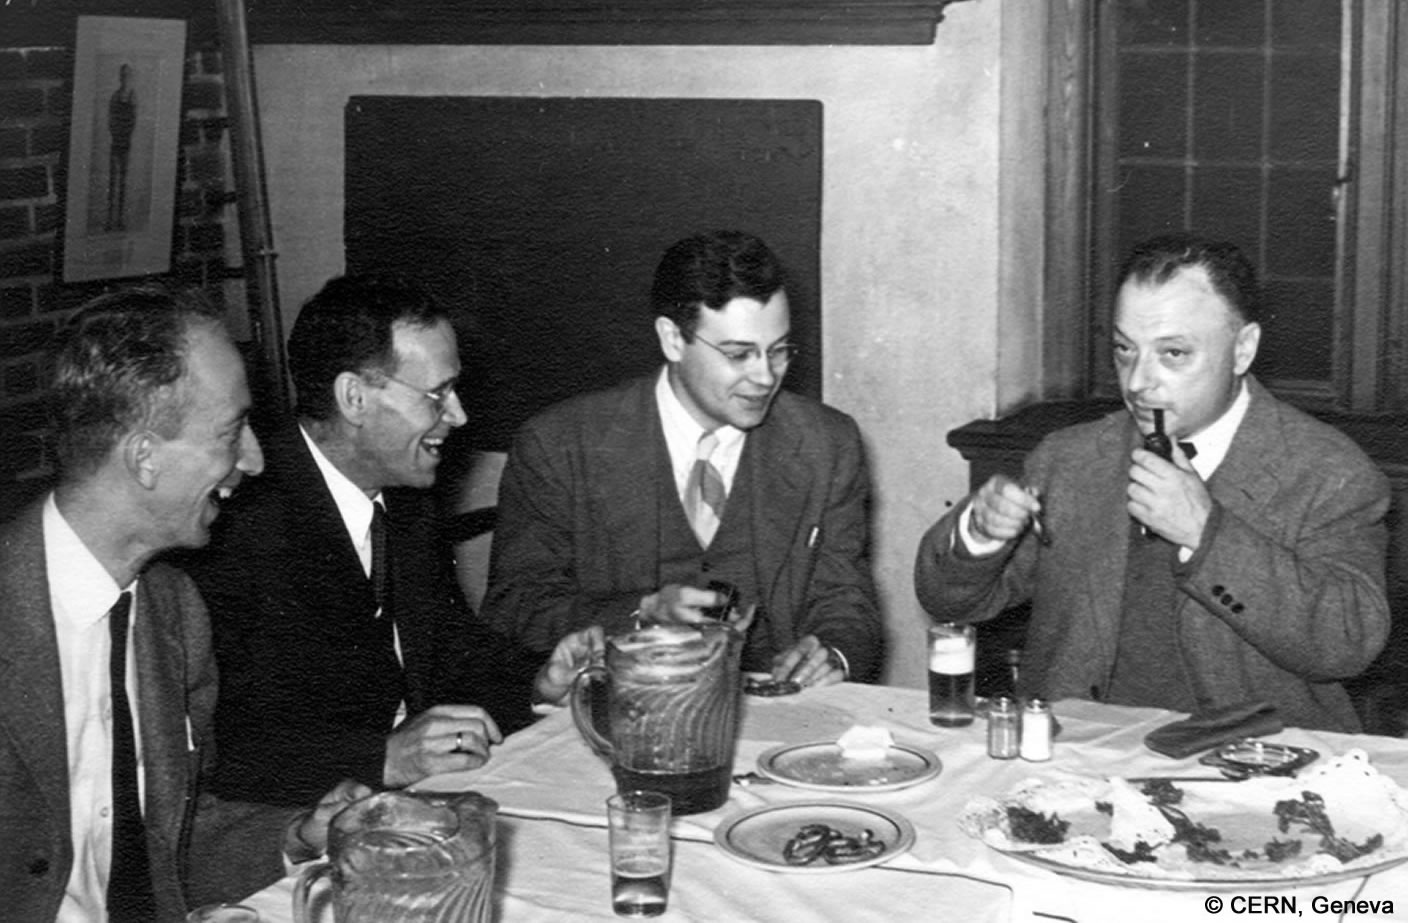 Wolfgang Pauli is sitting at a table with three men and is about to light a pipe. There are empty plates and glasses on the table